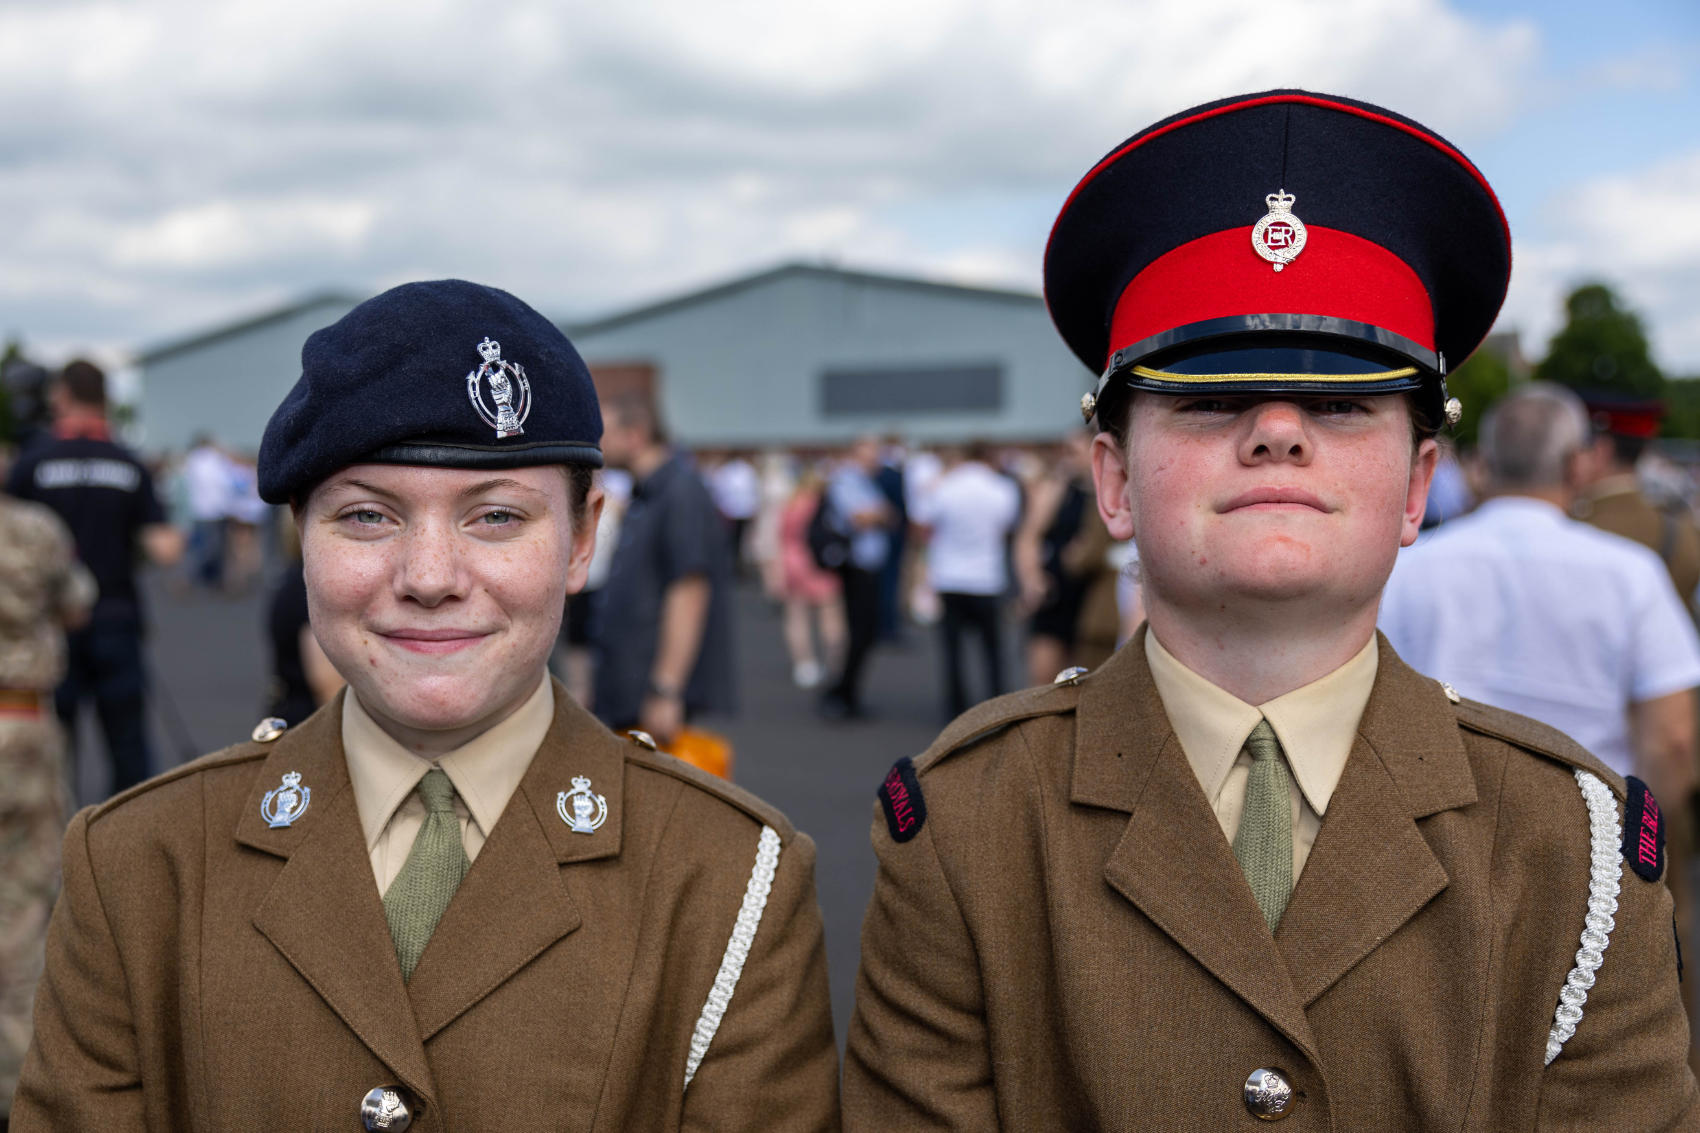 Kate and Laura Hanna have taken the first step on their military careers